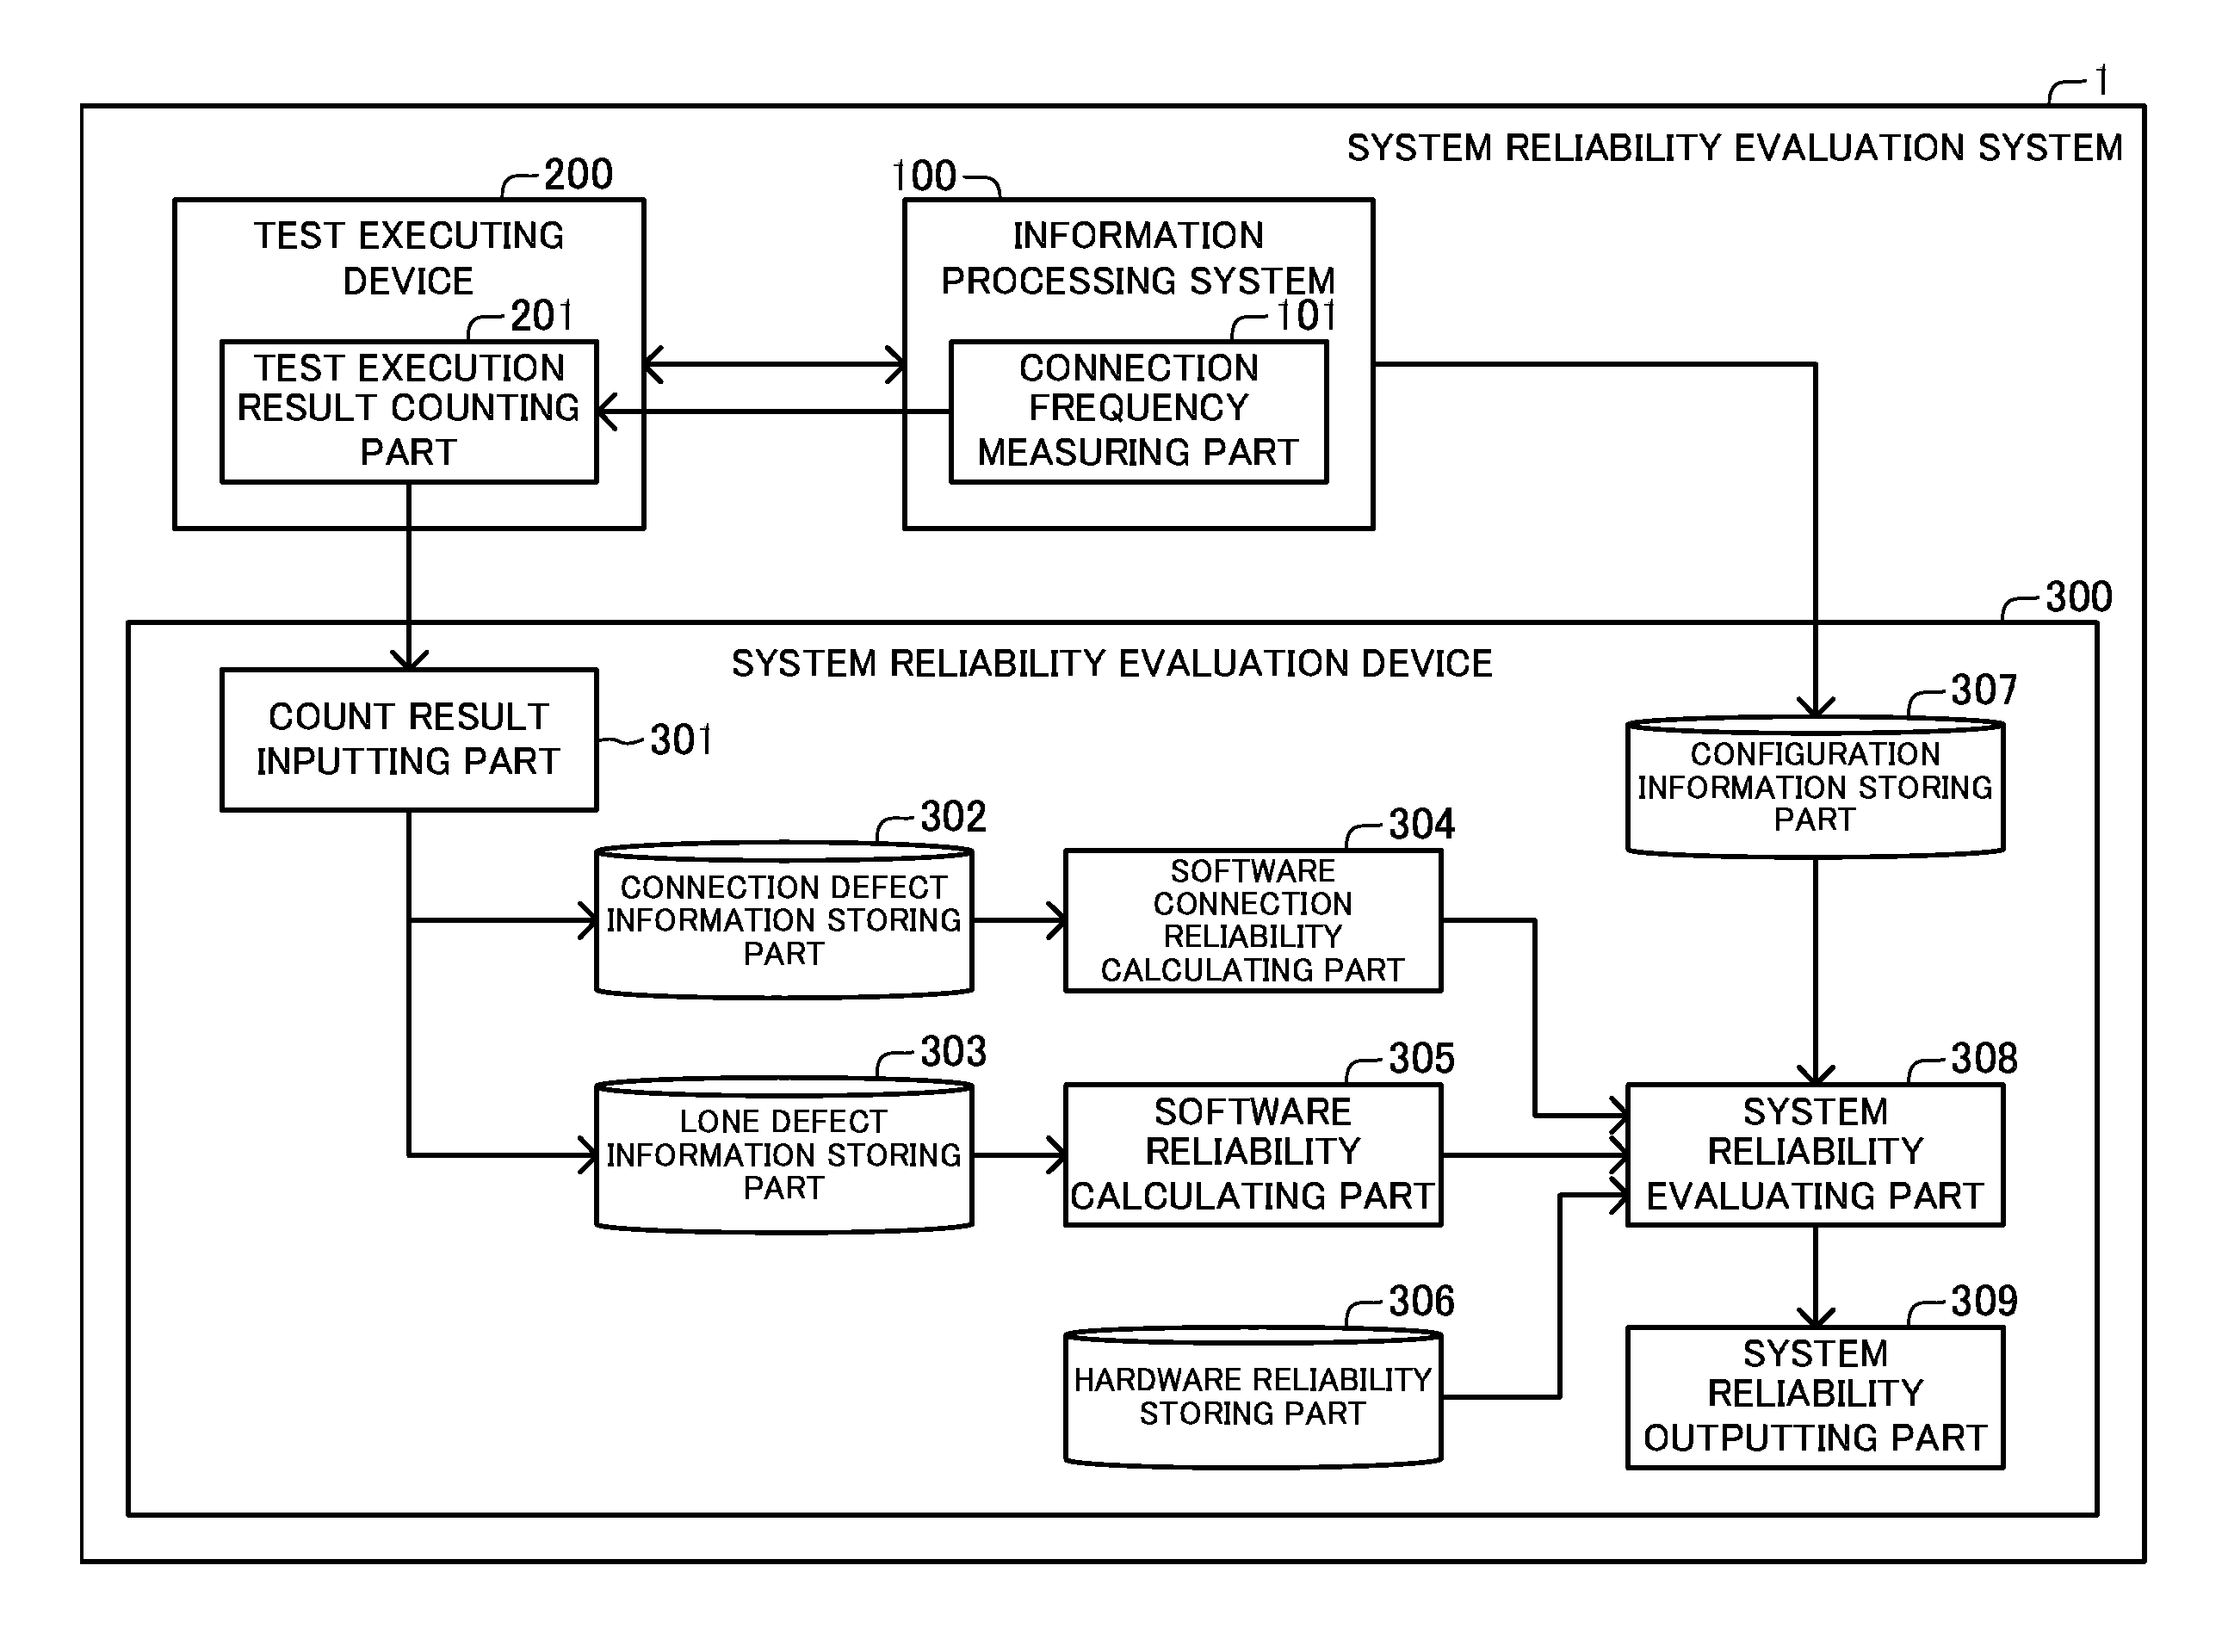 System reliability evaluation device